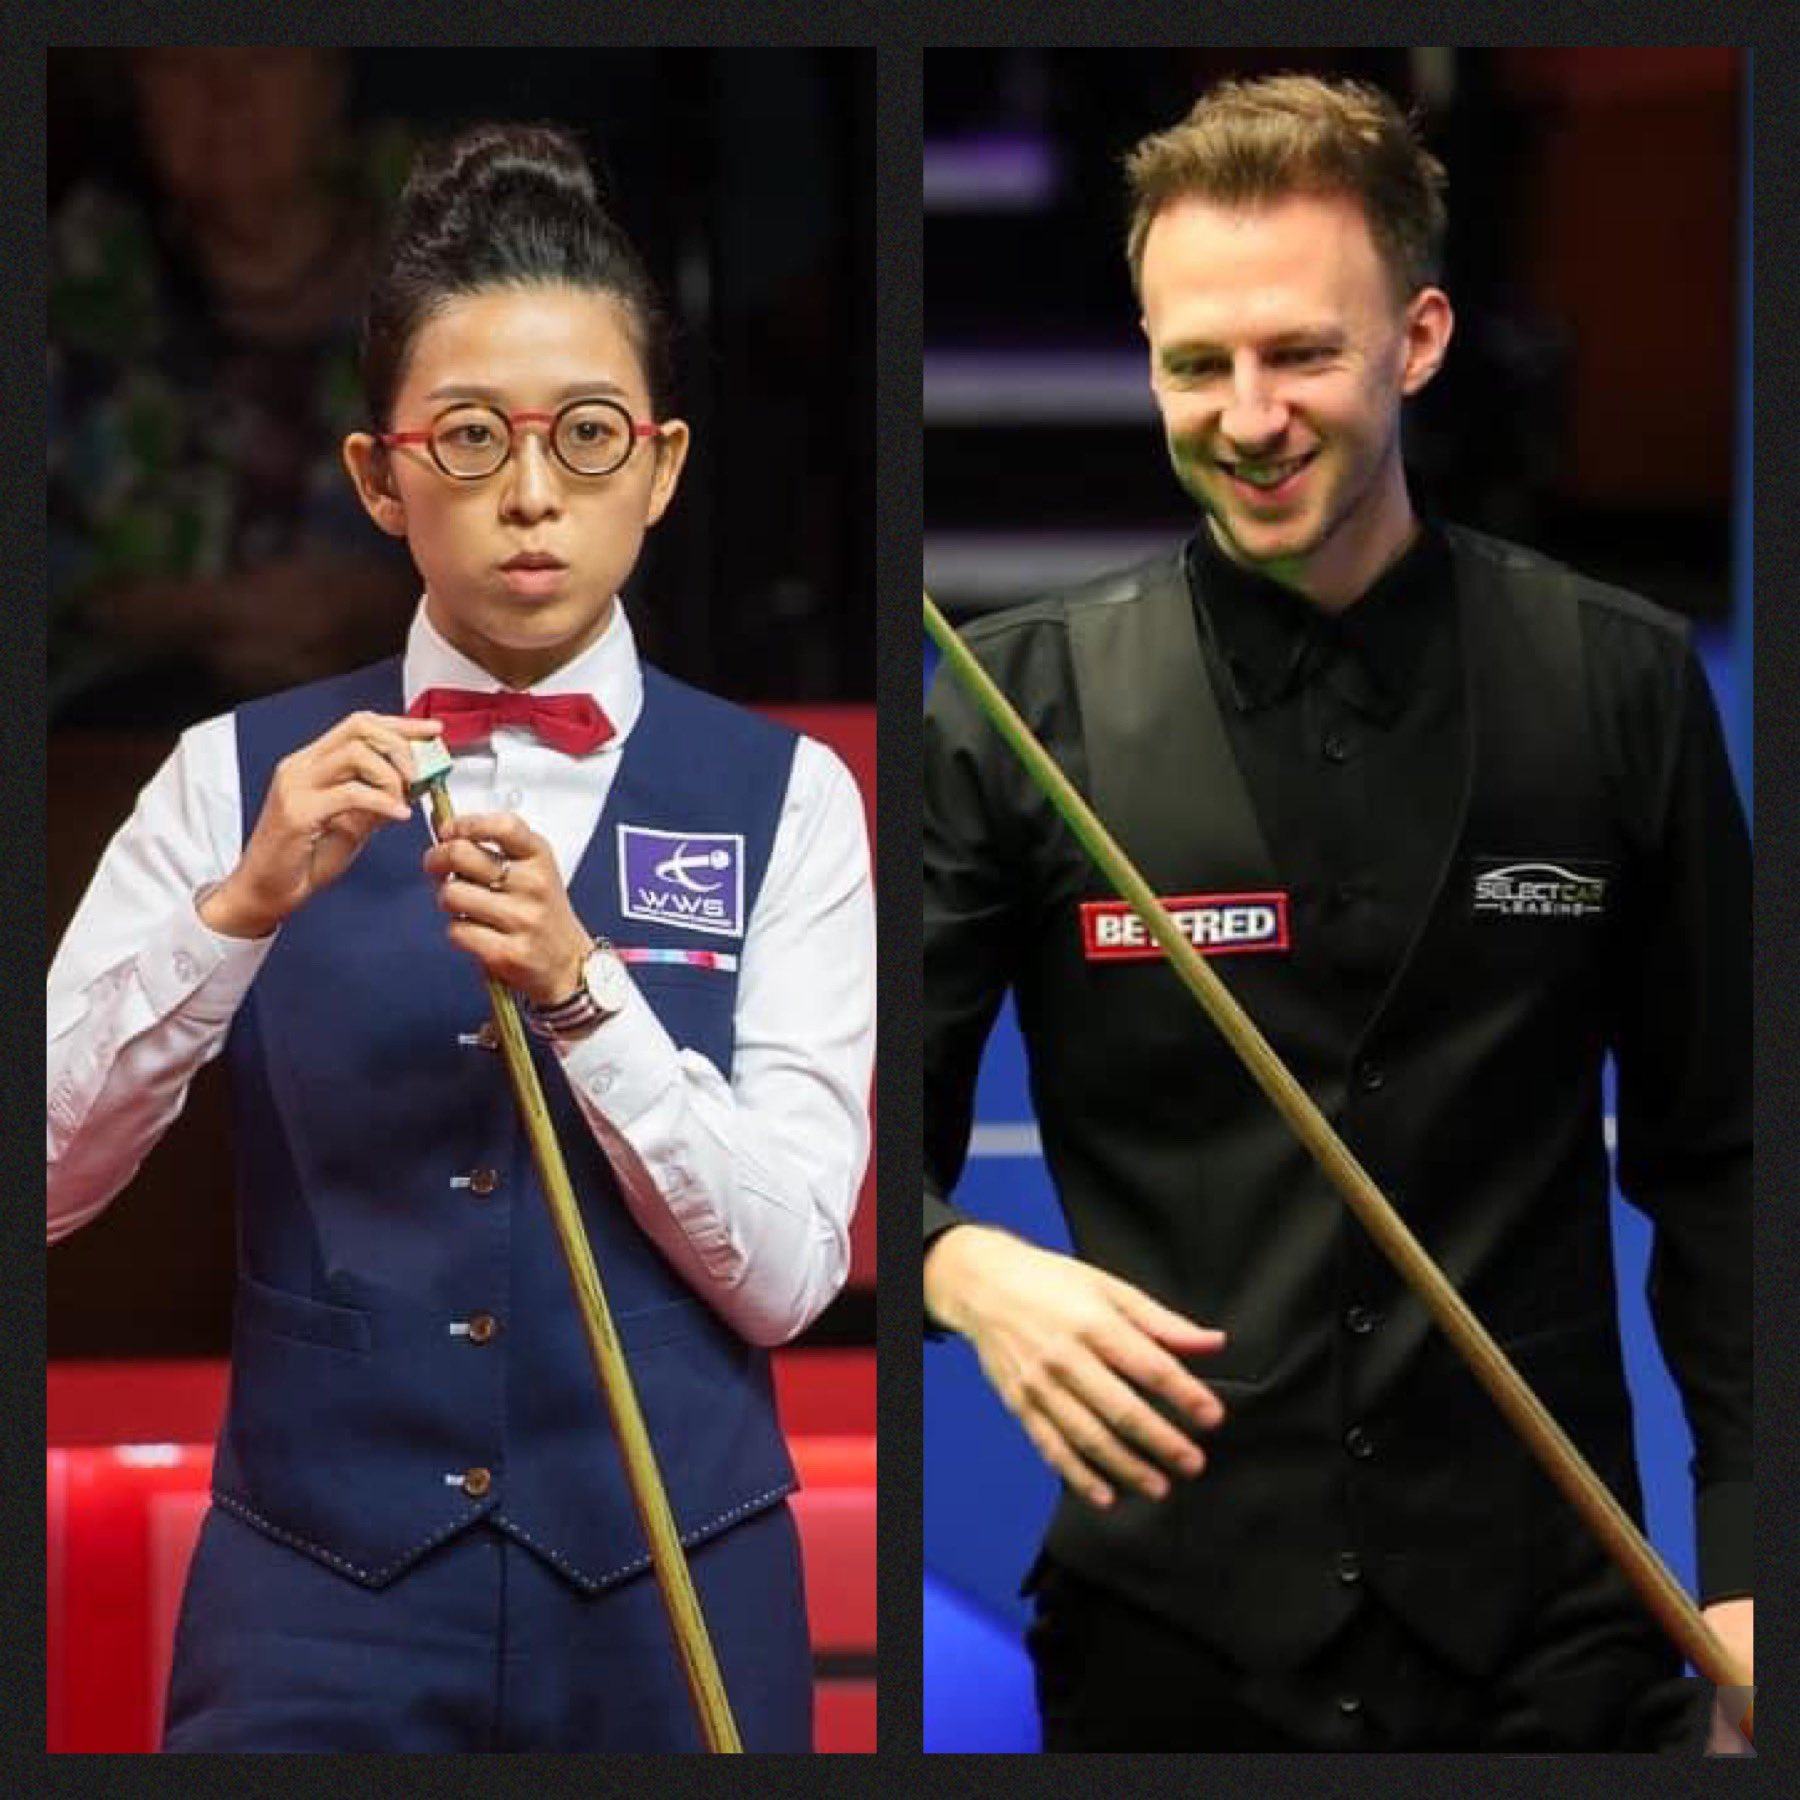 Three-time women’s world champion Ng On-yee will team up with 2019 world champion Judd Trump for the mixed doubles tournament. Photo: WST